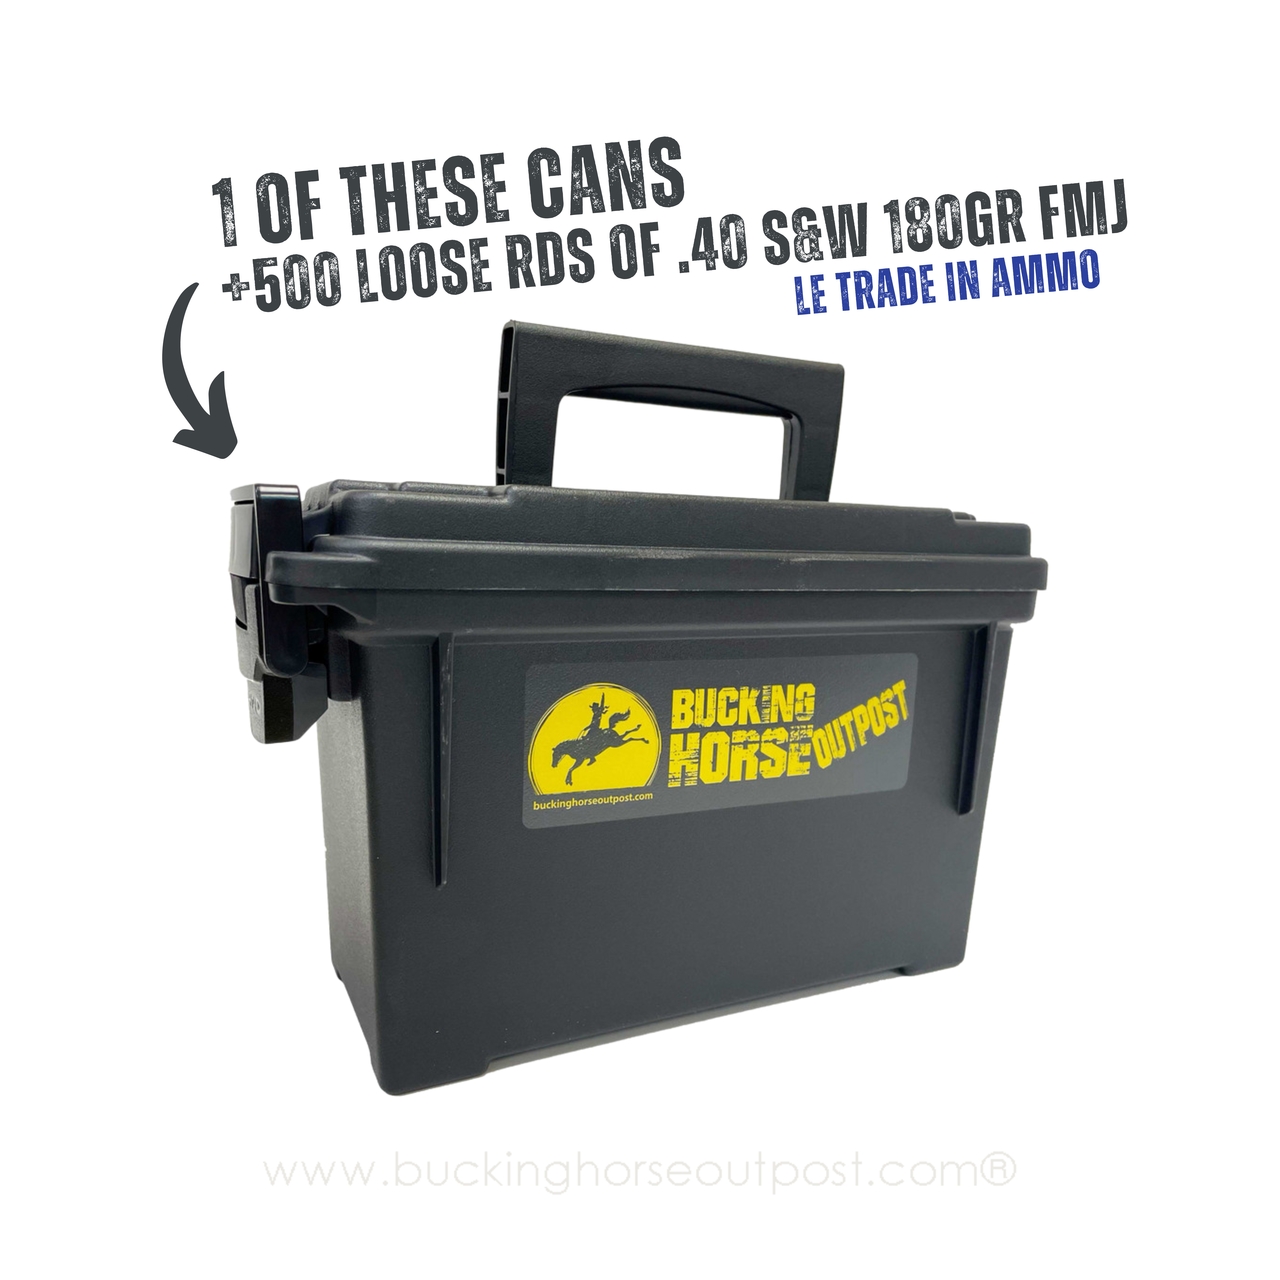 BHO Bulk Bundle #9 -500rds .40 S&W Full Metal Jacket 180 Grain 30cal  Plastic Ammo Can - Police Trade In - FREE SHIPPING on orders over $125